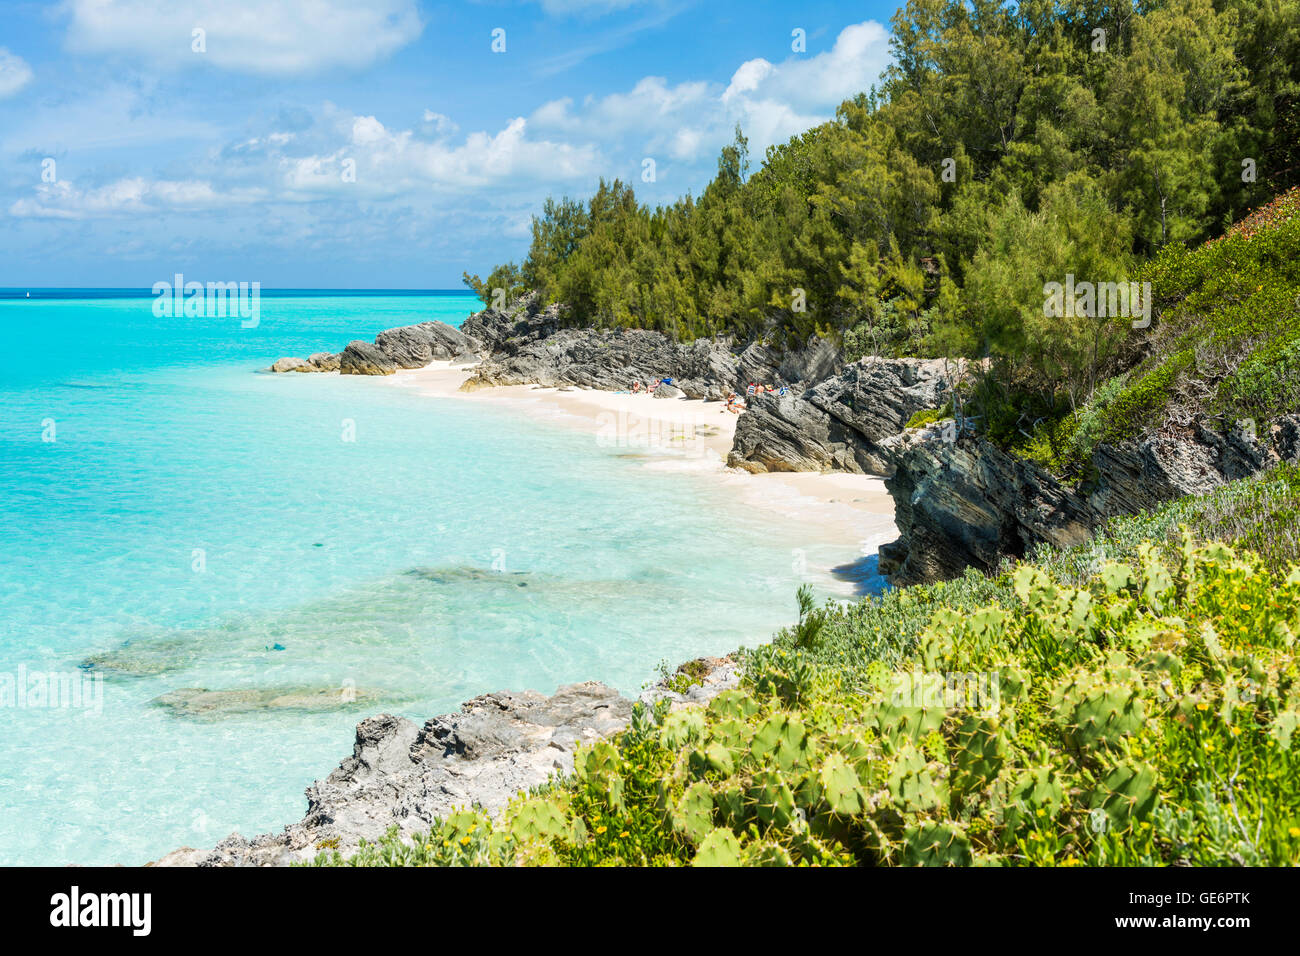 Shoreline and small beach with pink sands at Whale Bay, Bermuda. Stock Photo